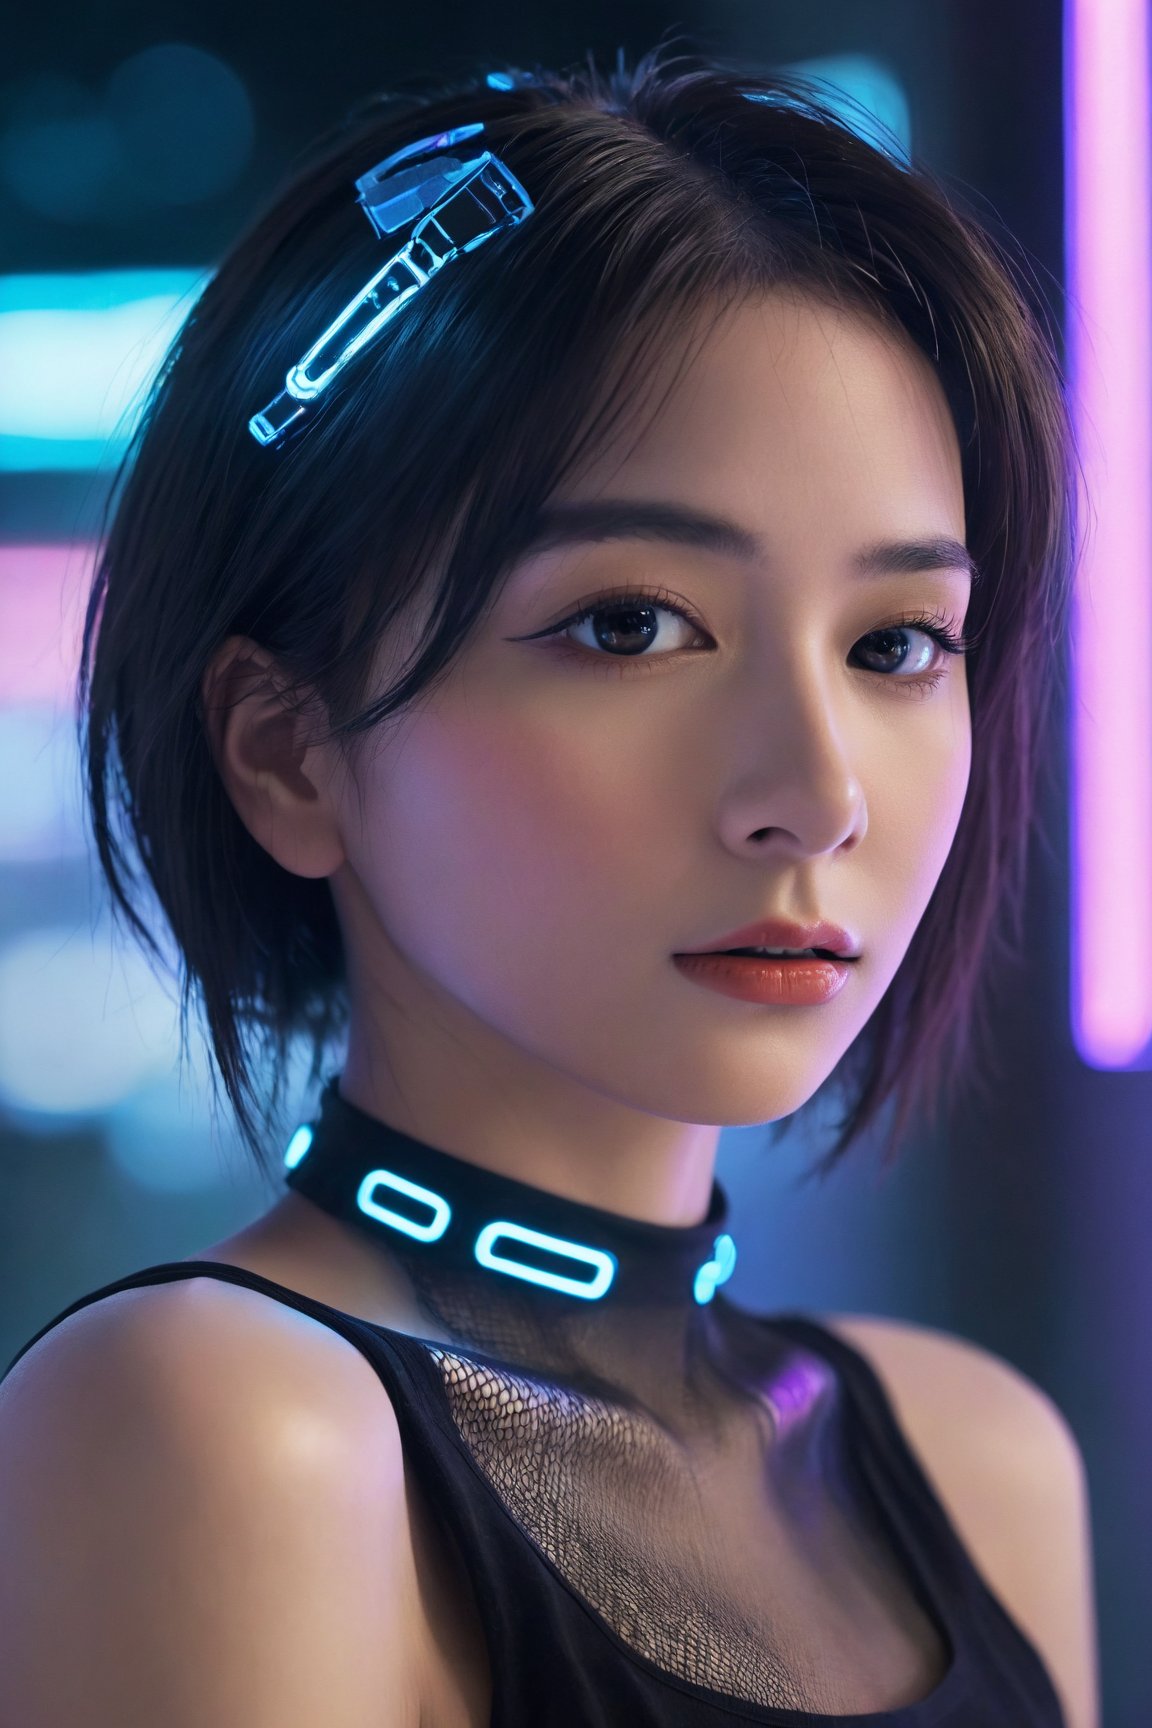 1woman, cinematic portrait of a cyberpunk girl whose upper body is framed against the backdrop of a neon-lit,Look at viewer, nocturnal cityscape. Half of her face is human, exuding a sense of resilience and humanity, while the other half is a complex, intricately designed cybernetic machine, showcasing advanced technology seamlessly integrated with organic life. Her expression is contemplative, capturing the duality of her existence in a world where man and machine converge. The cybernetic parts gleam with a metallic sheen, illuminated by the surrounding neon lights which reflect in the intricate patterns of her machinery. The color palette is a fusion of warm human tones against the cold, industrial hues of her mechanical side, set against the contrasting cyberpunk environment. The photo is taken with a Sony α7R IV to achieve a depth of field that sharply details the textures of her cybernetic implants while gently blurring the vibrant city life in the background, emphasizing the juxtaposition between character and setting, with a touch of dystopian elegance,ZeeJKT48